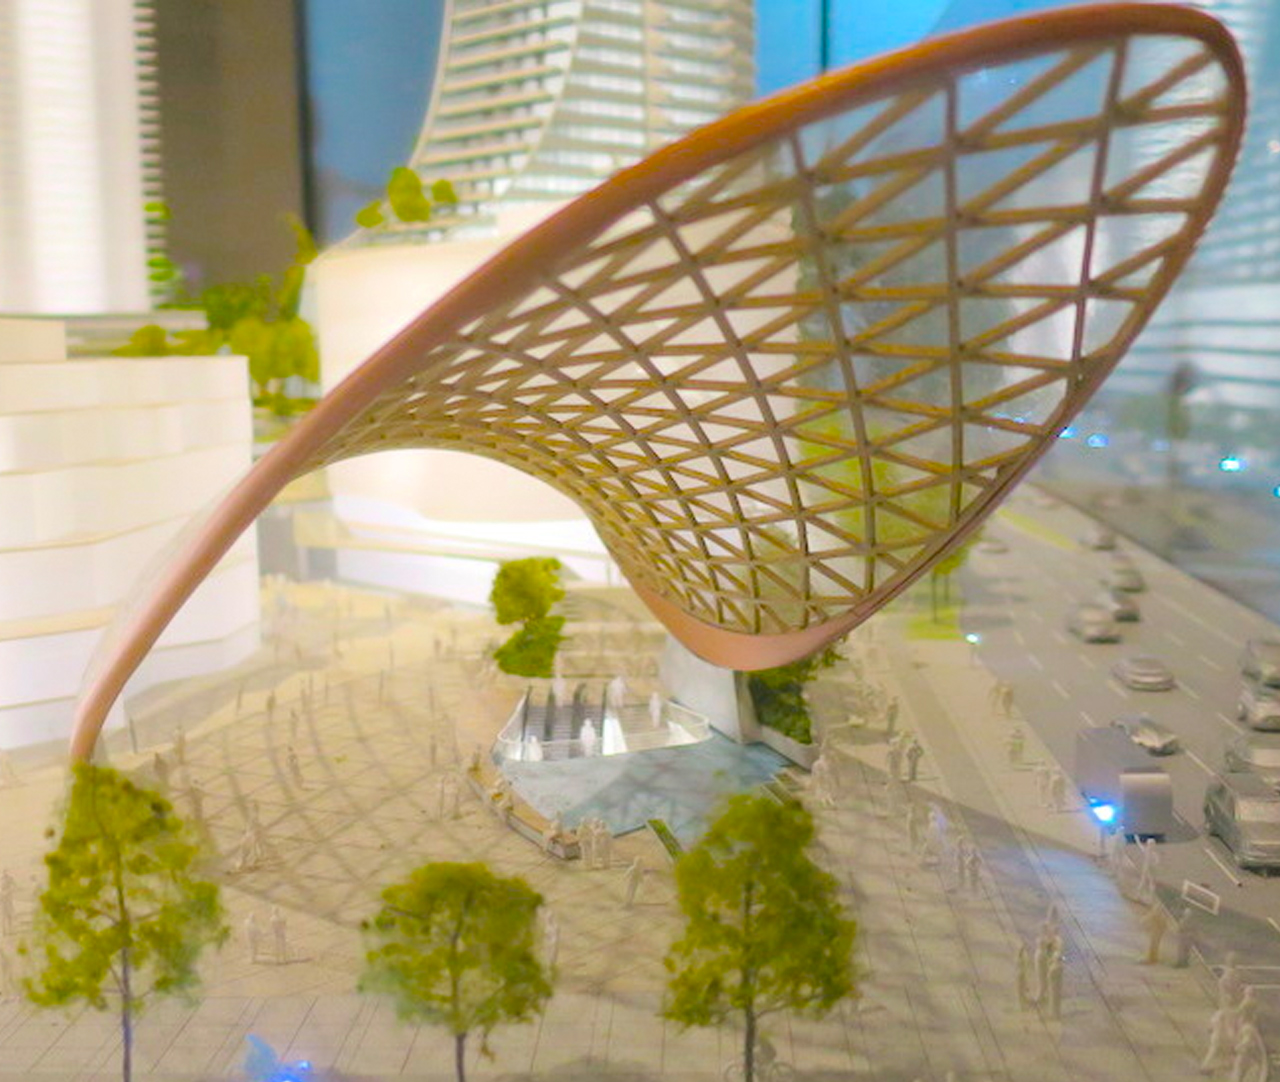 Close-up image of the Oakridge model; shown here is the transit canopy at 41st and Cambie.